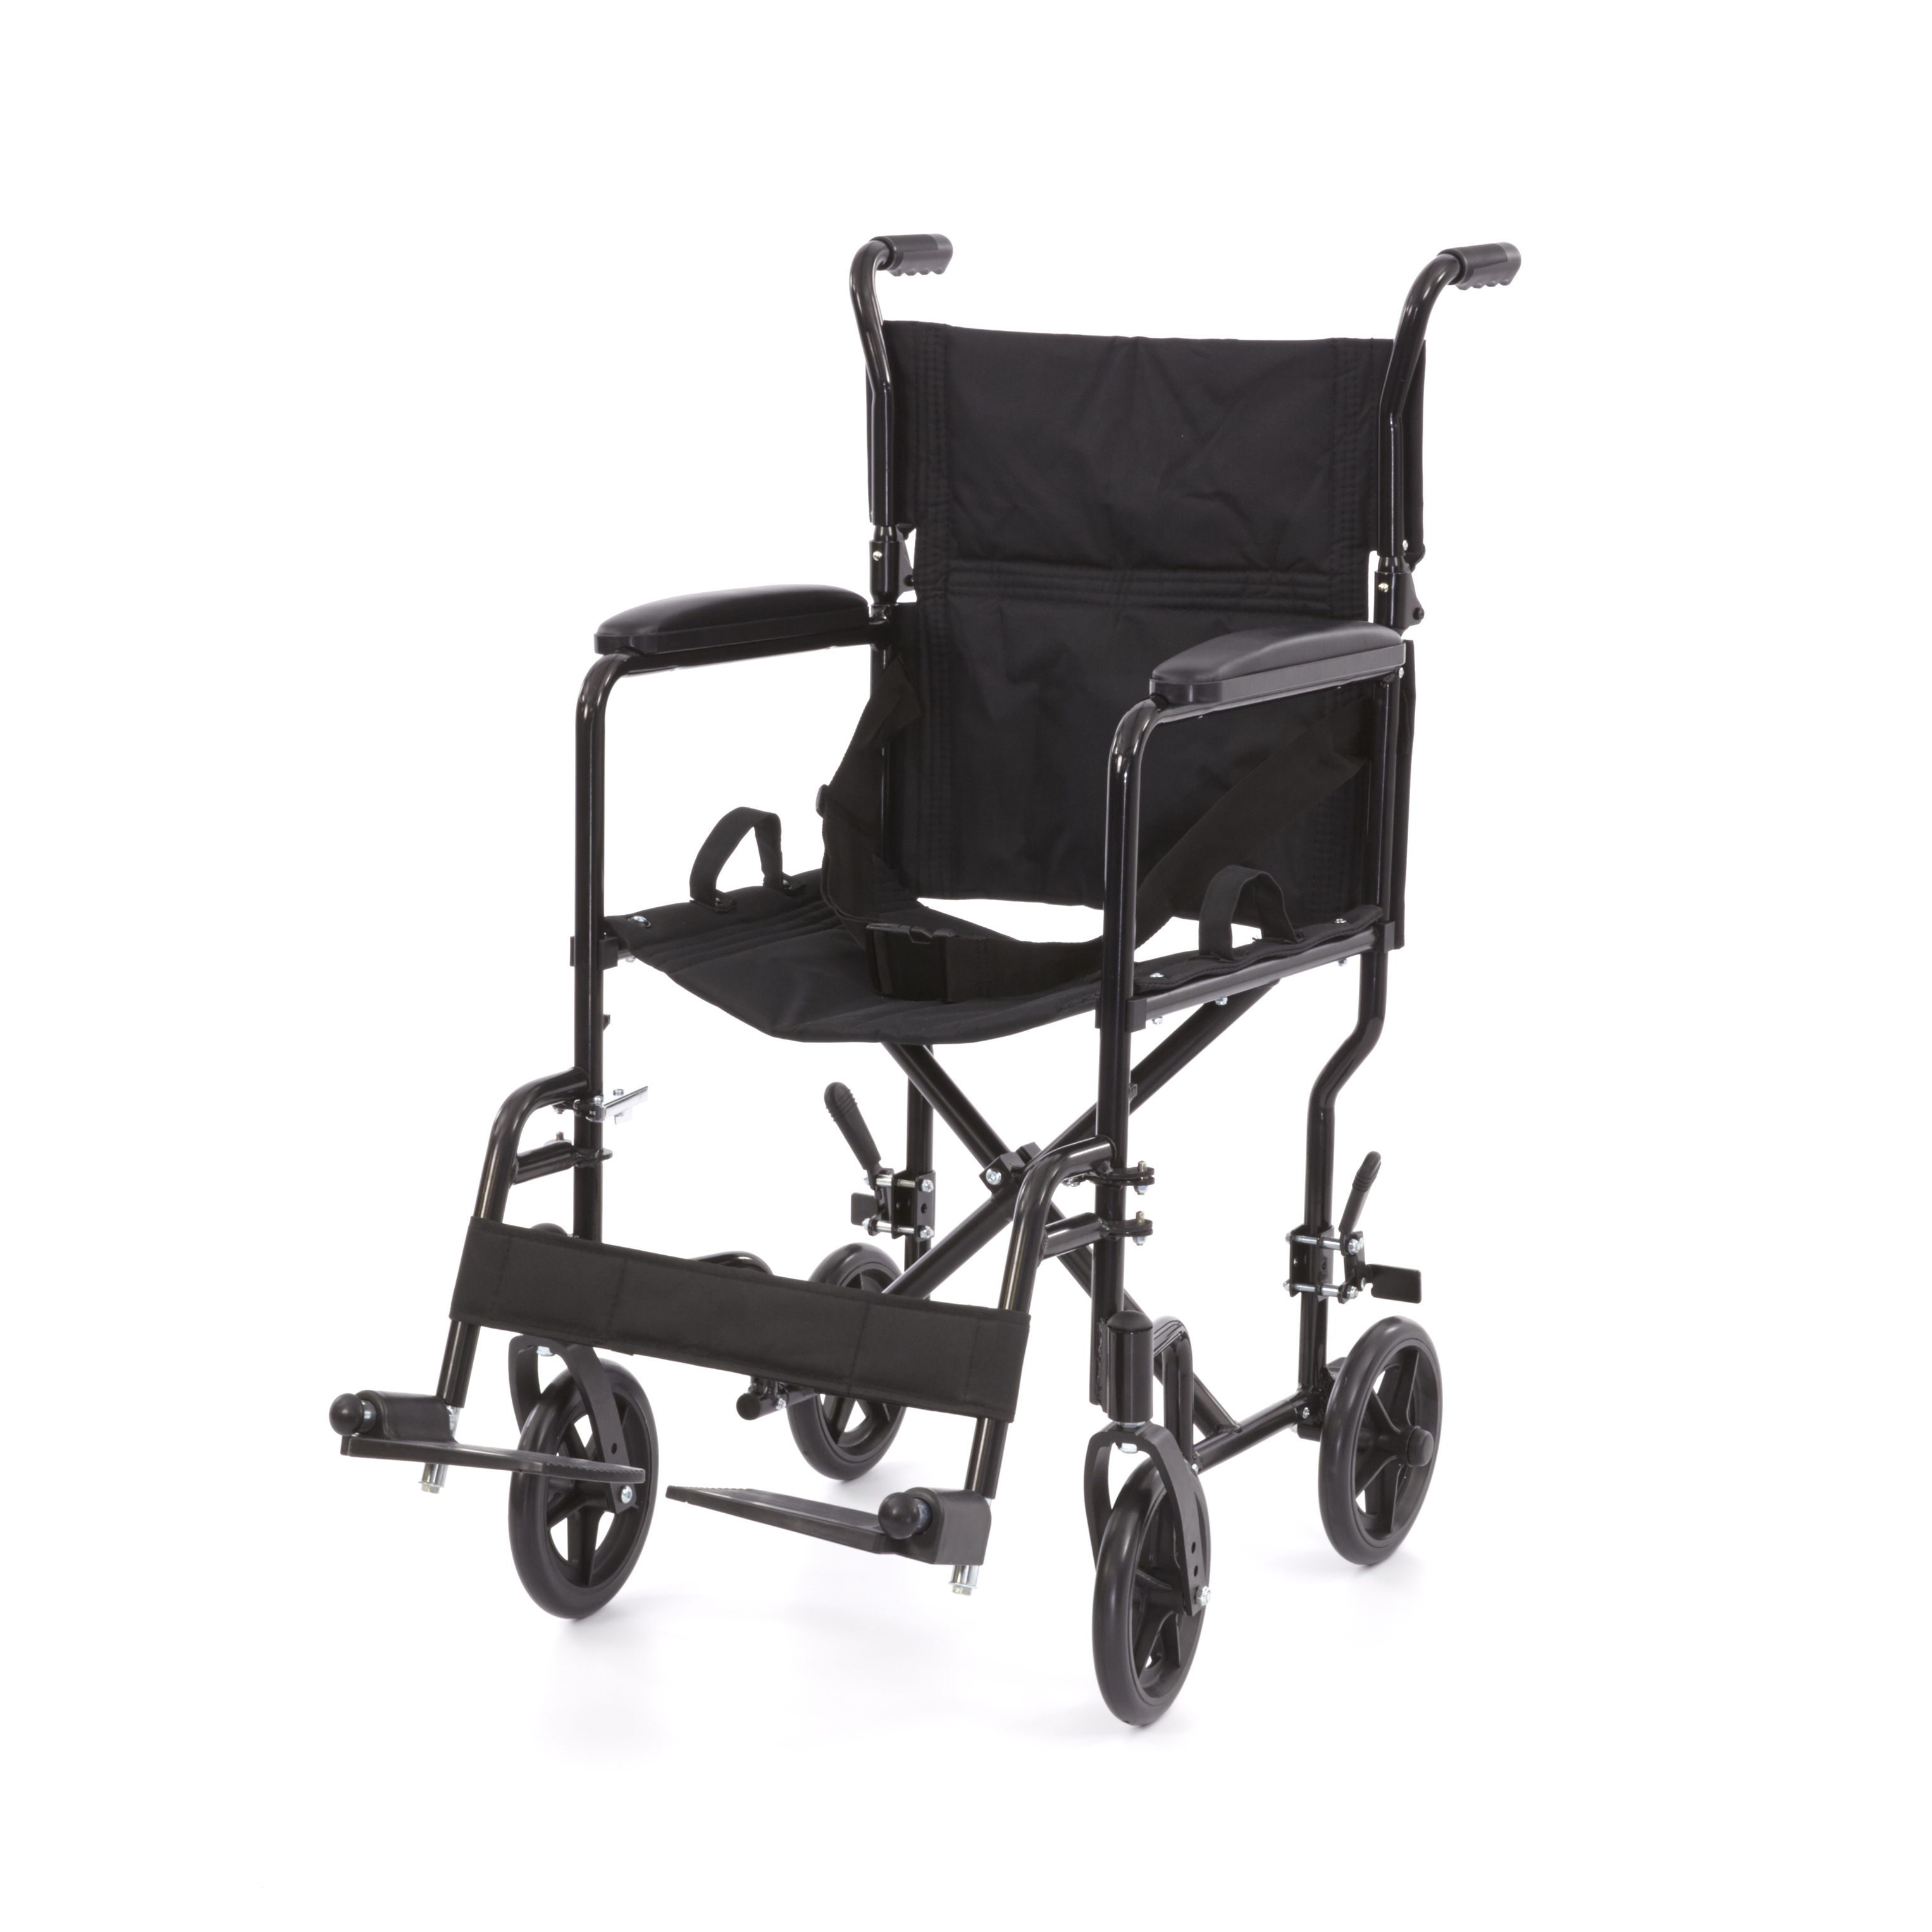 WHE-02-BLACK Romed foldable aluminium transport chair, black, with foldable back, fixed armrest and swing away footrest, per piece in a carton.